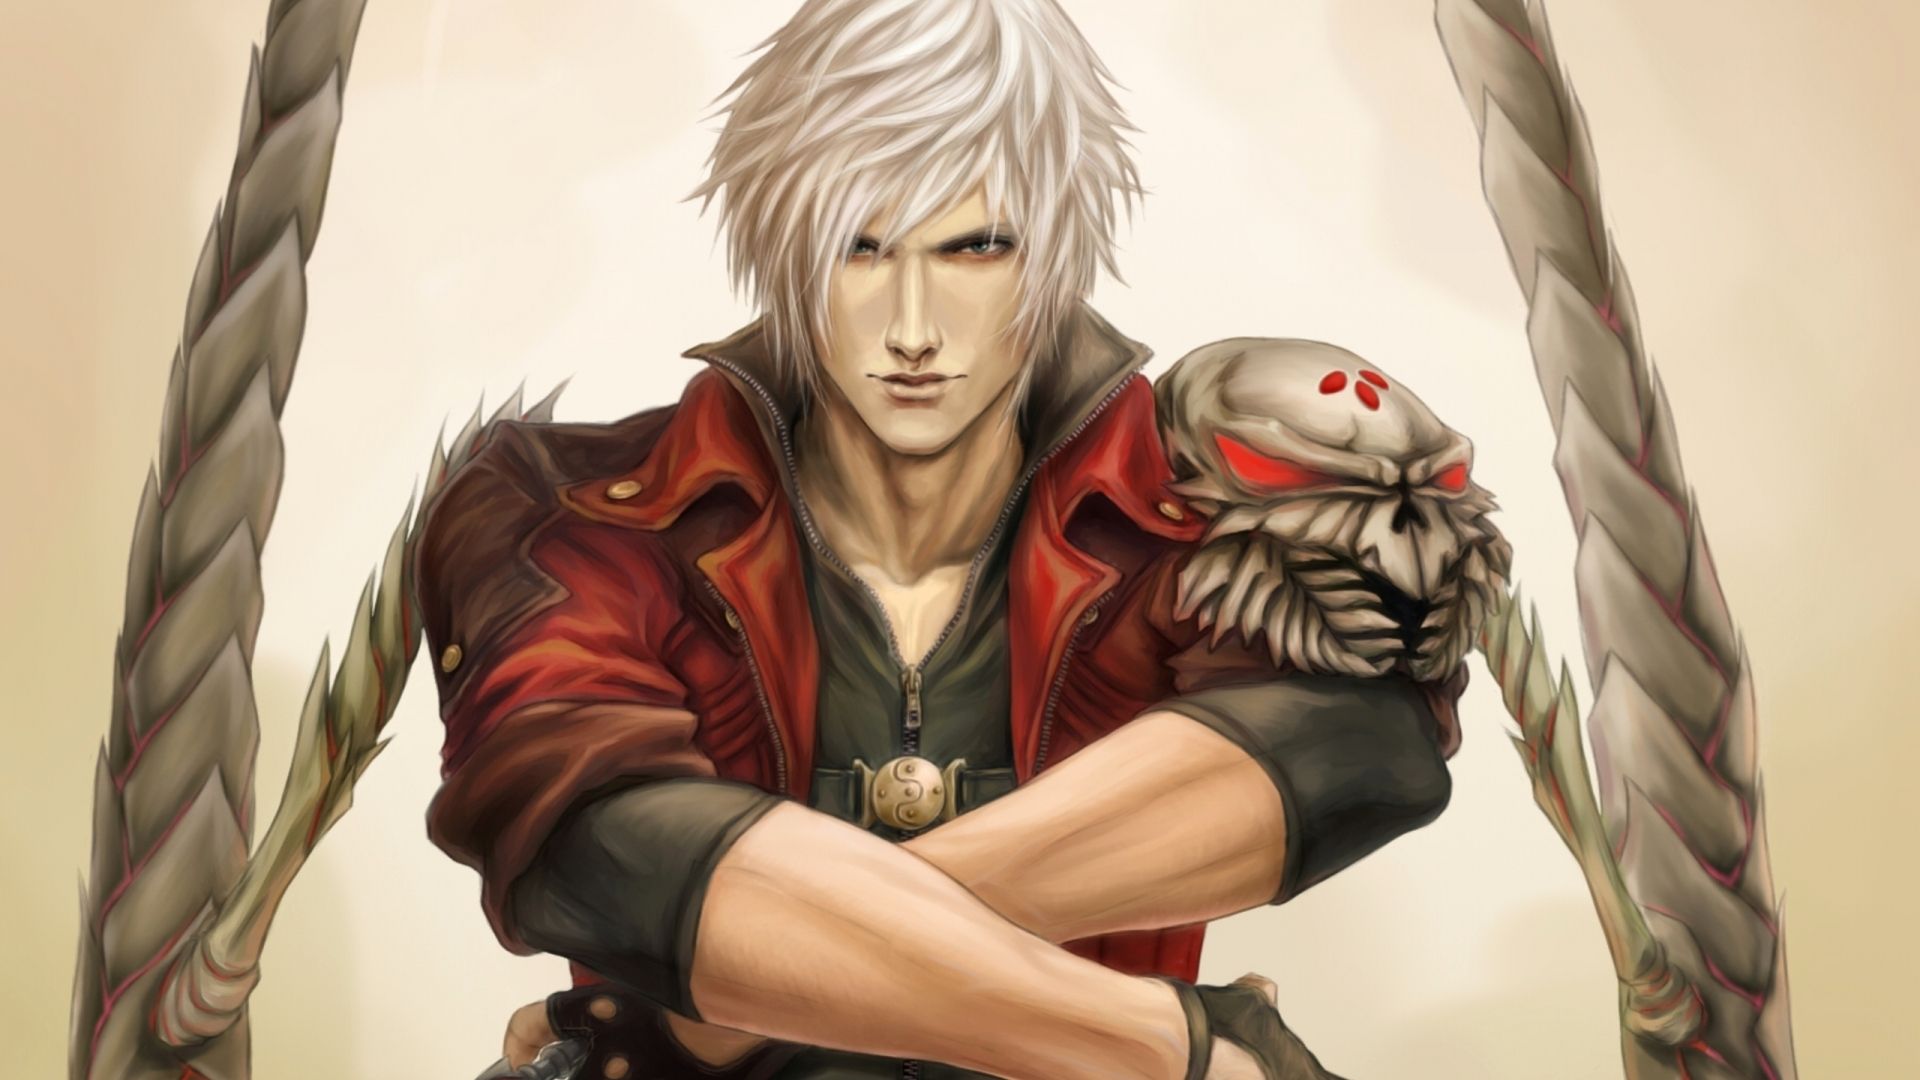 Devil may cry Wallpaper - Download Free Gaming Backgrounds